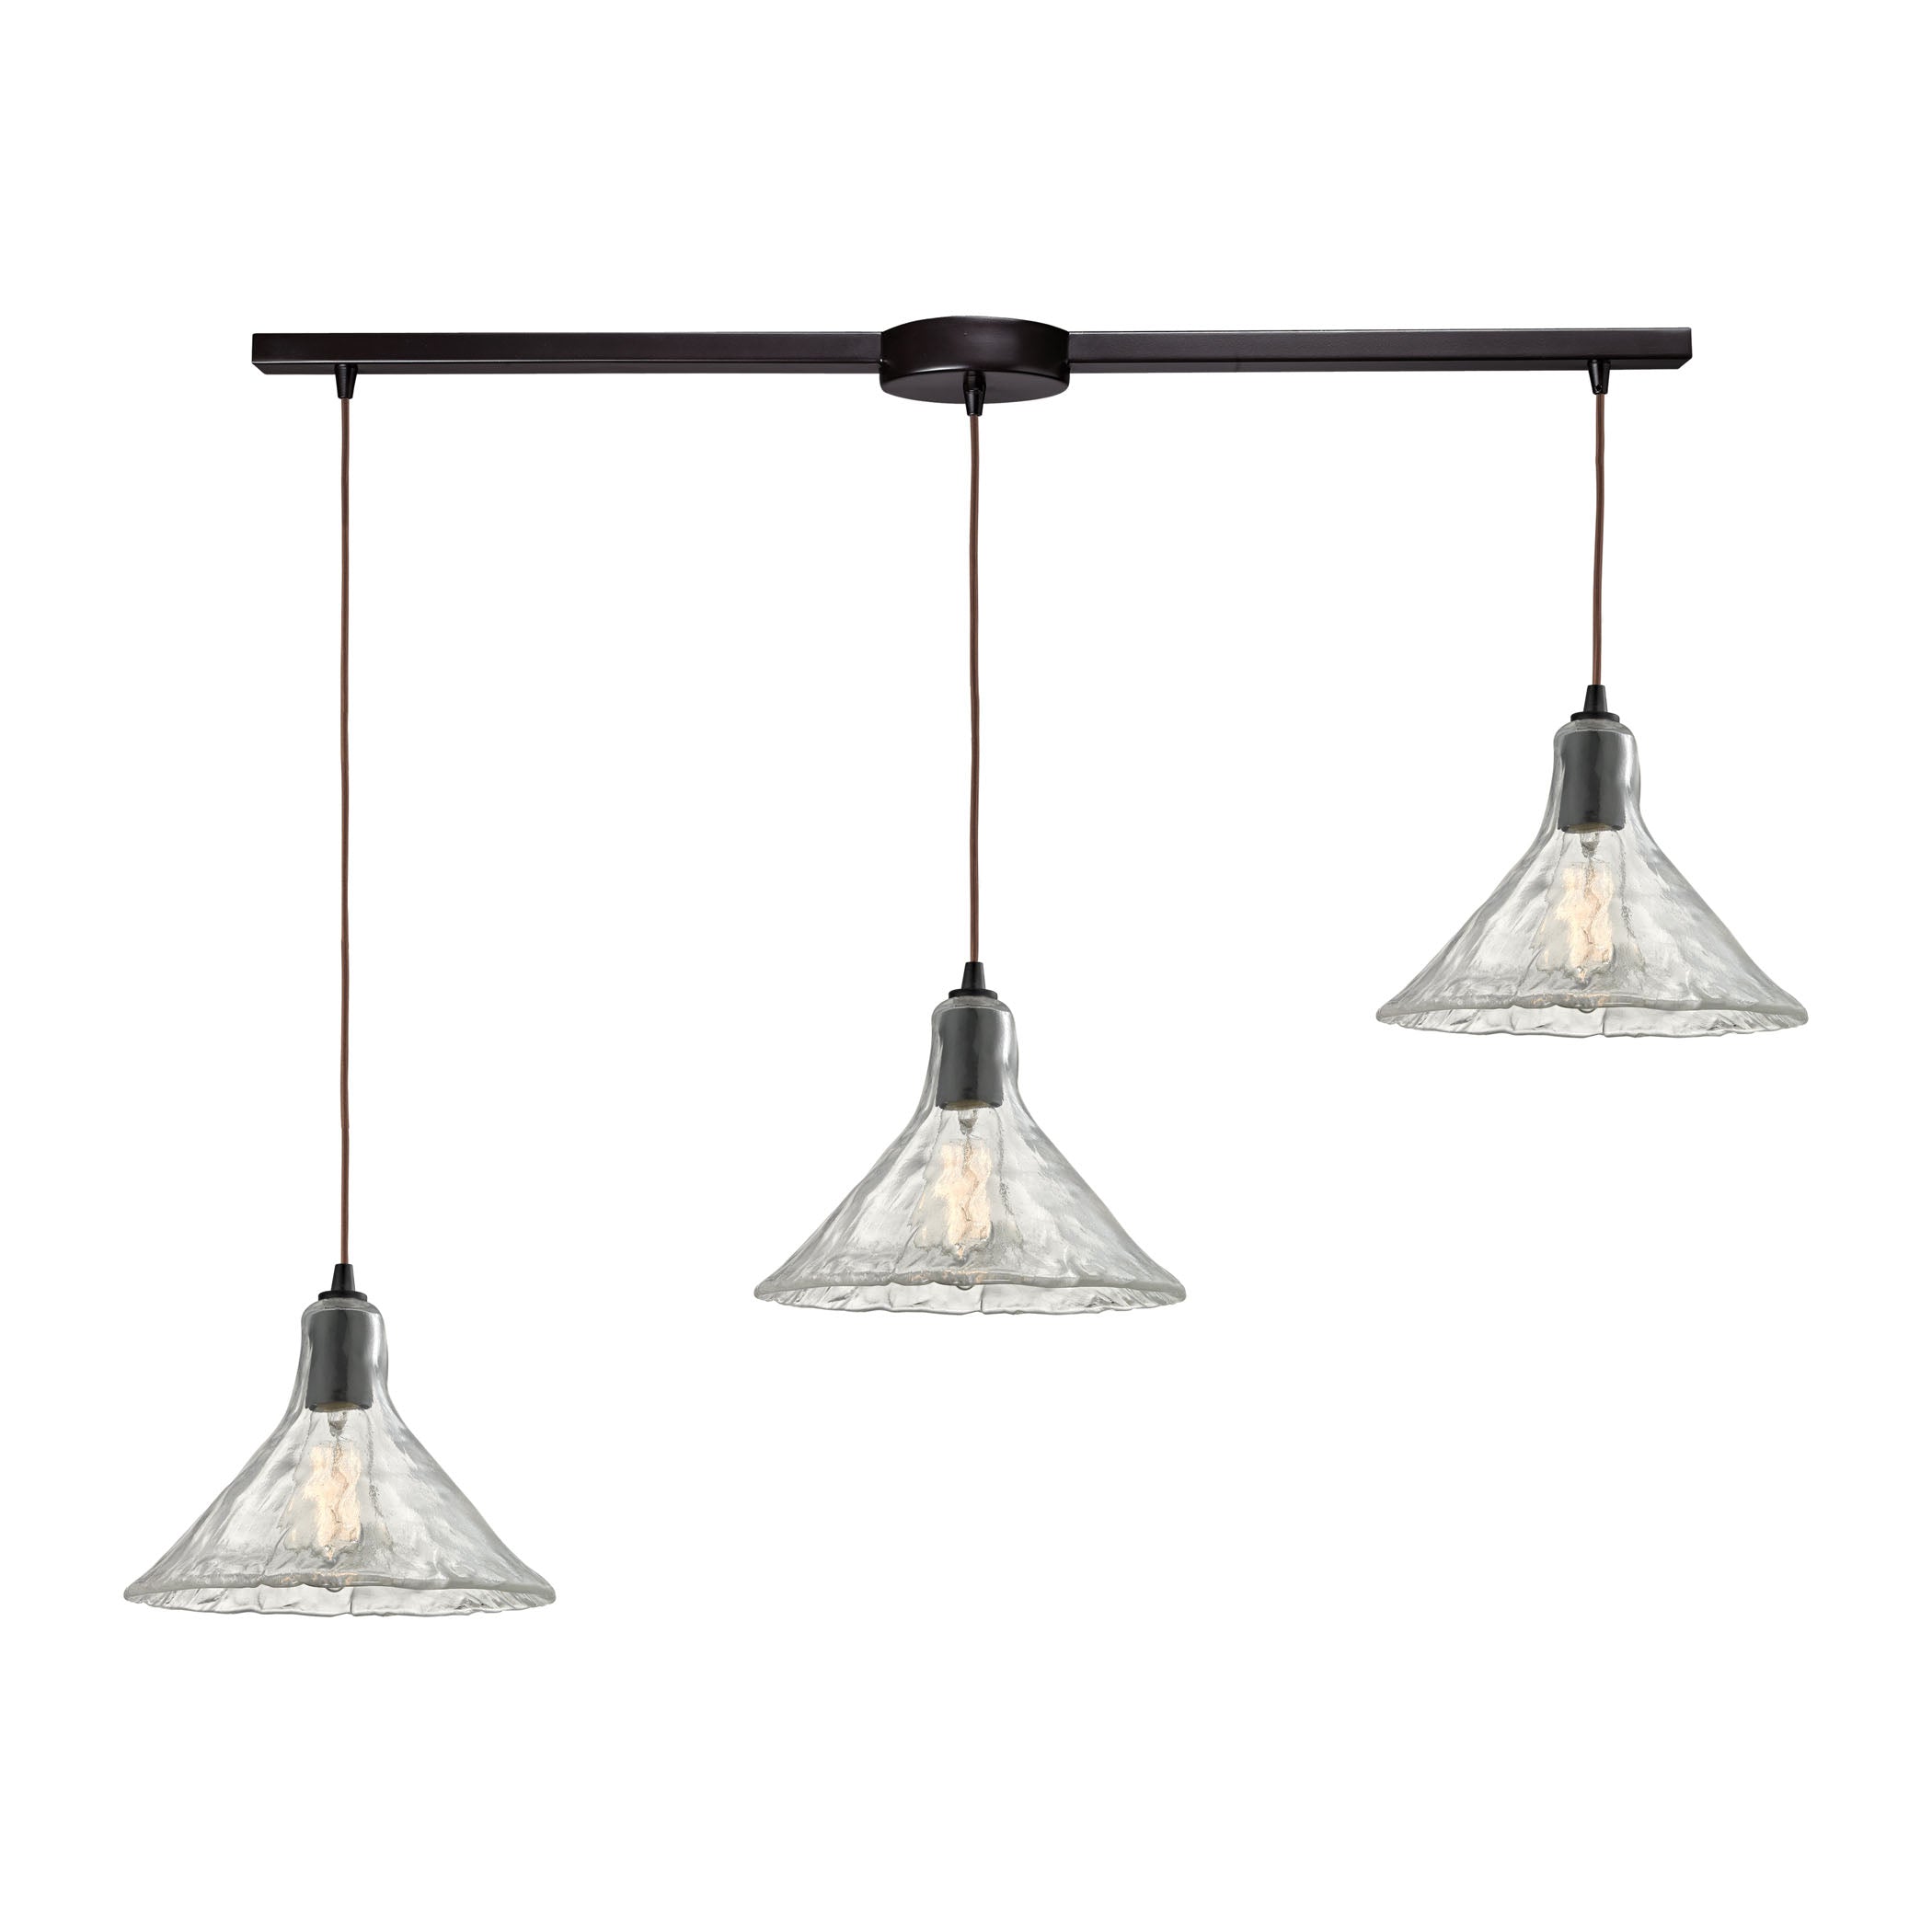 ELK Lighting 10435/3L Hand Formed Glass 3-Light Linear Pendant Fixture in Oiled Bronze with Clear Hand-formed Glass